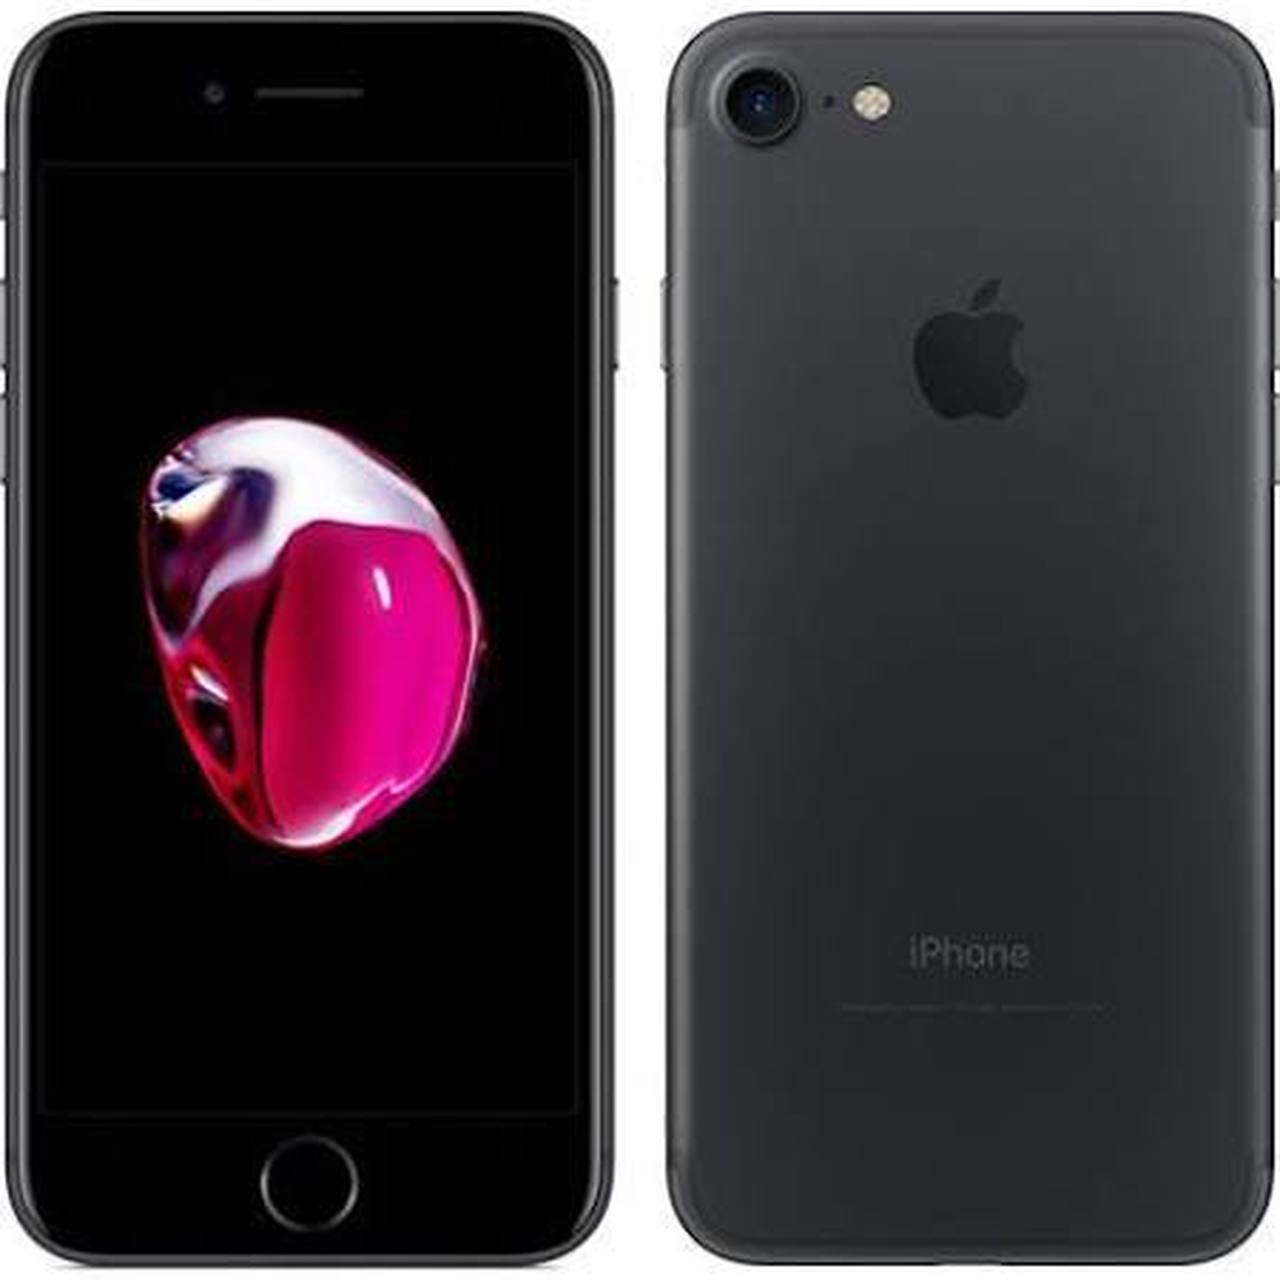 iPhone 7 price in Nepal